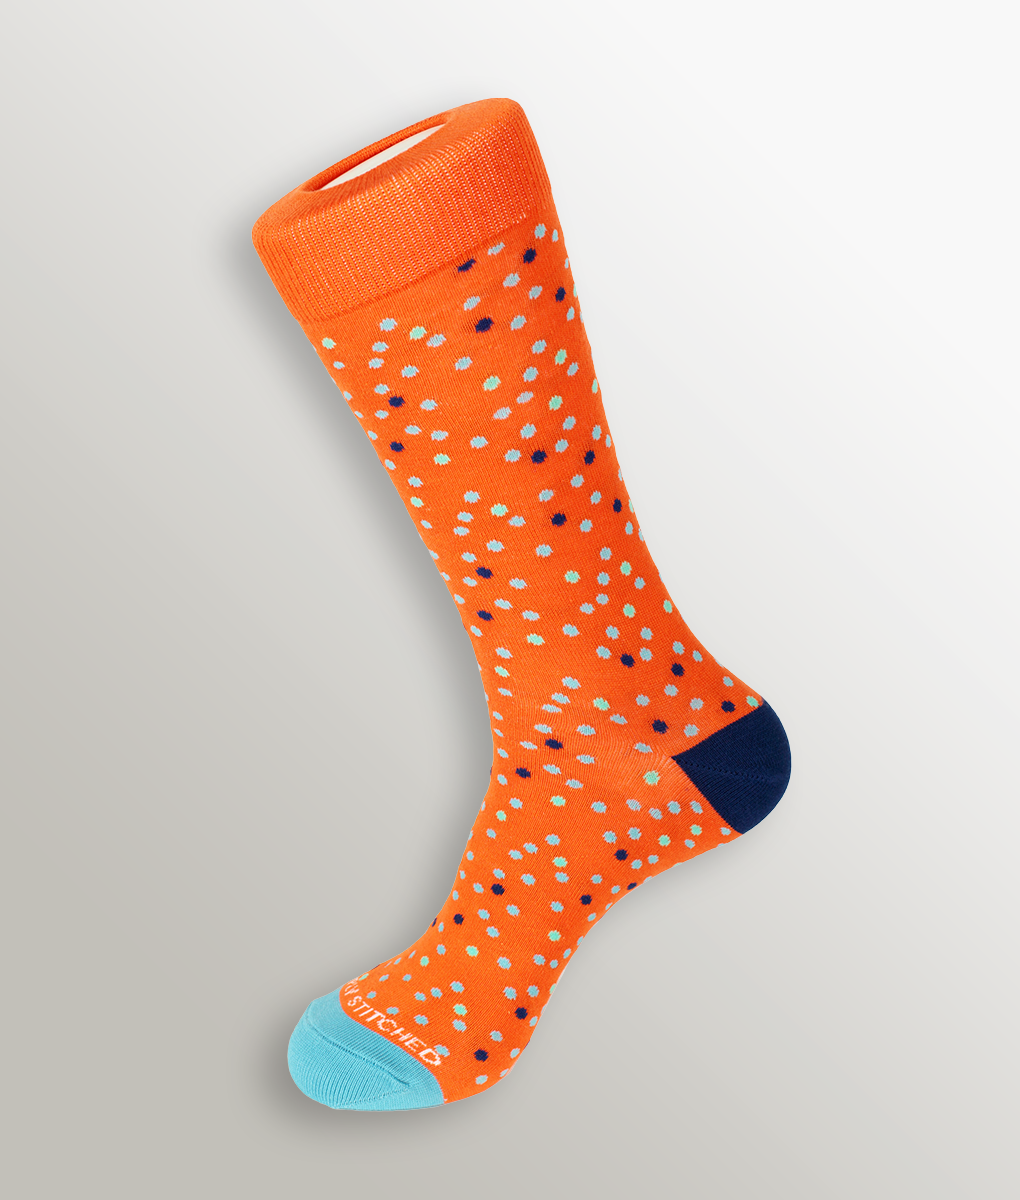 Unsimply Stitched Polka Dots Sock - Underwear Expert